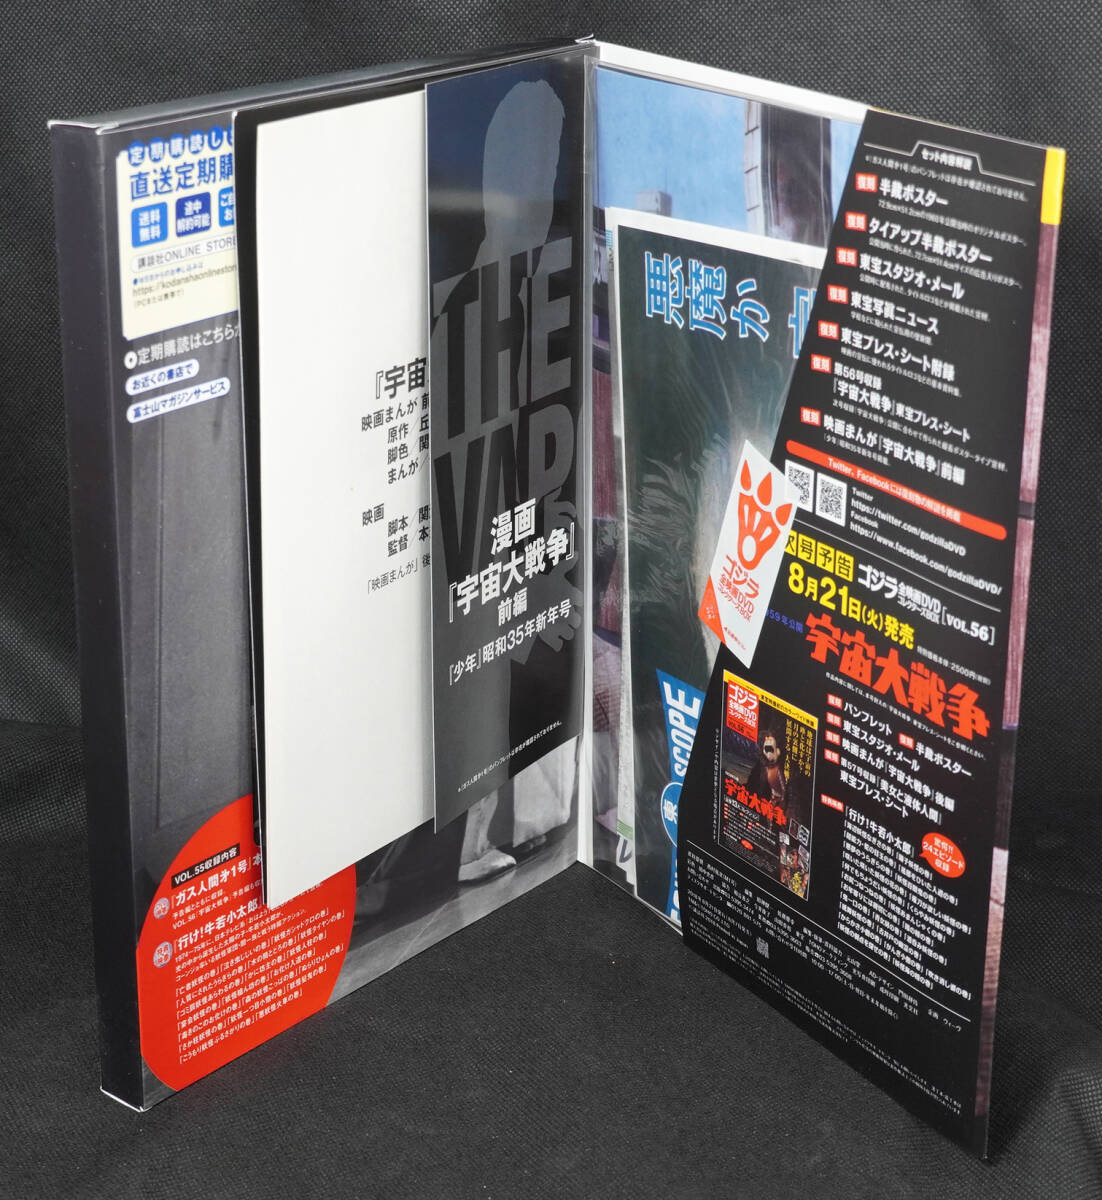 **55 gas human no. 1 number 1960 Godzilla all movie DVD collectors BOX DVD appendix completion goods 